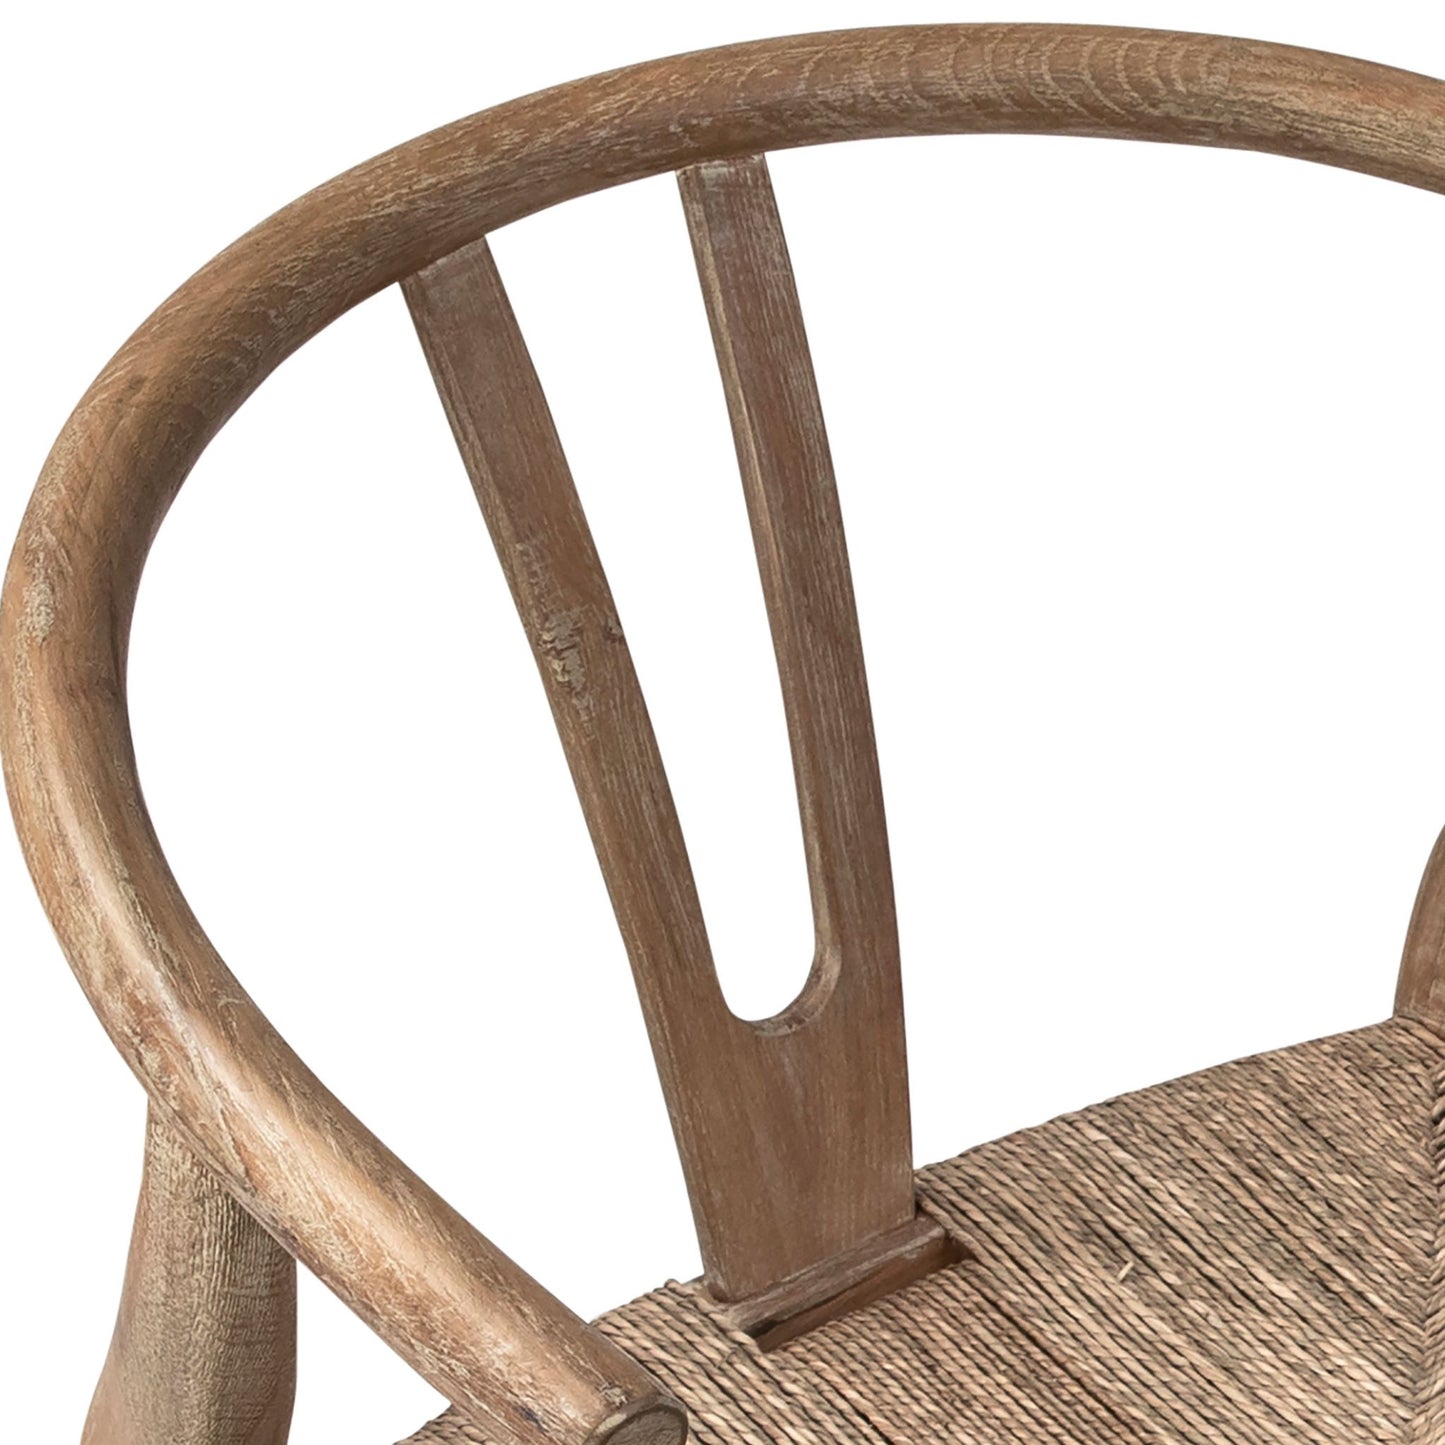 Eve Dining Chair